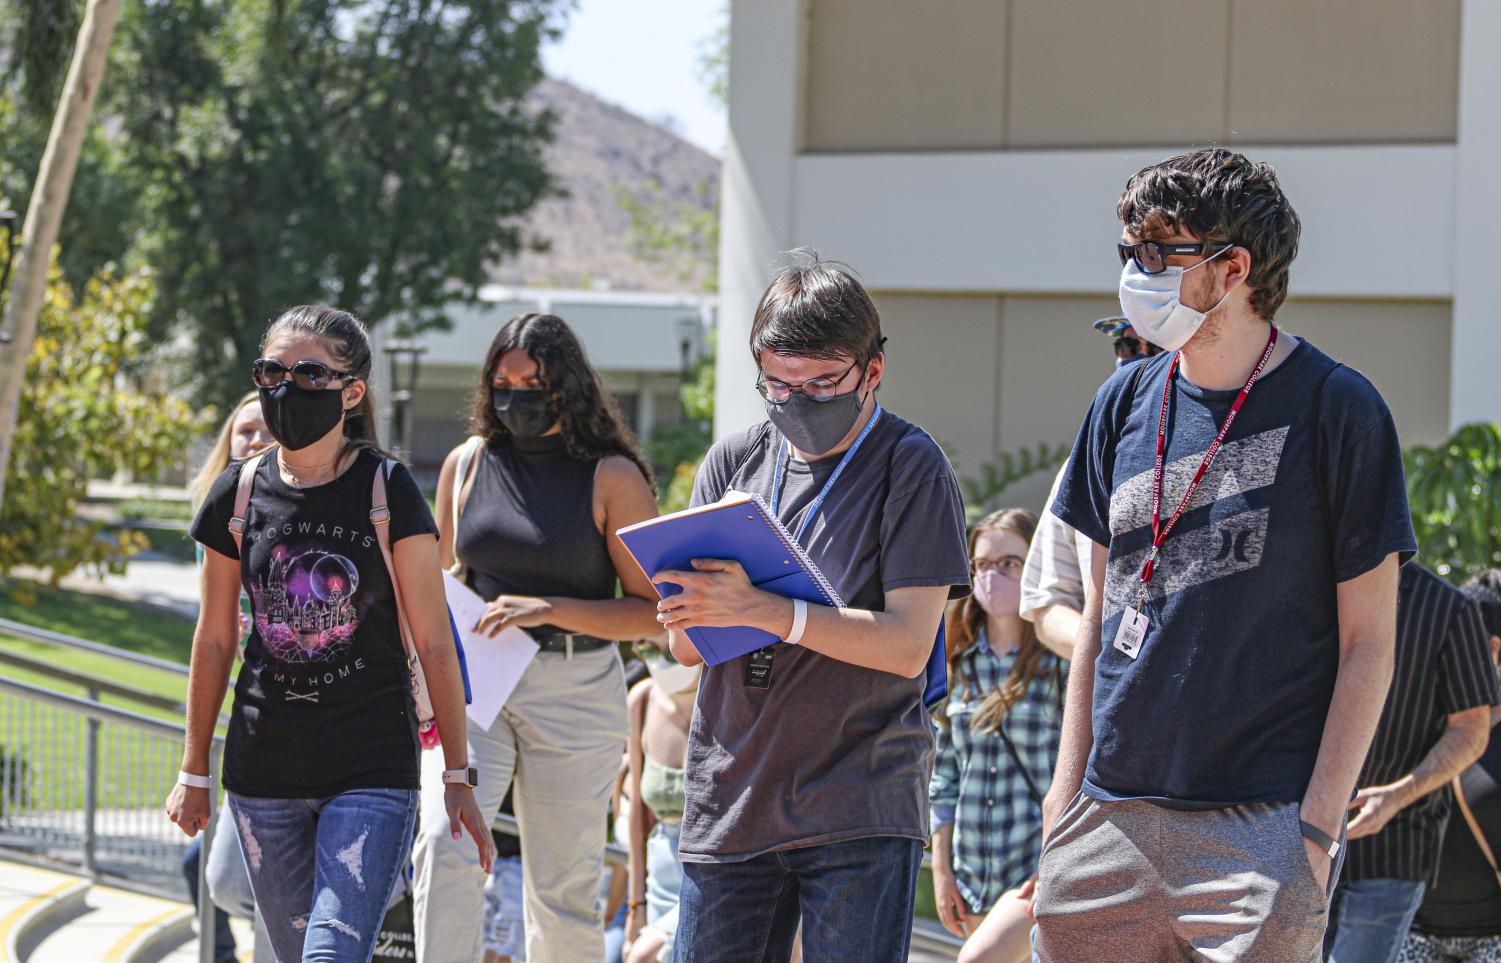 Moorpark+College+welcomed+first-year+students+on+campus+Monday+for+one+of+its+first+in-person+events+since+the+beginning+of+the+COVID-19+pandemic+for+New+Student+Welcome+Day.